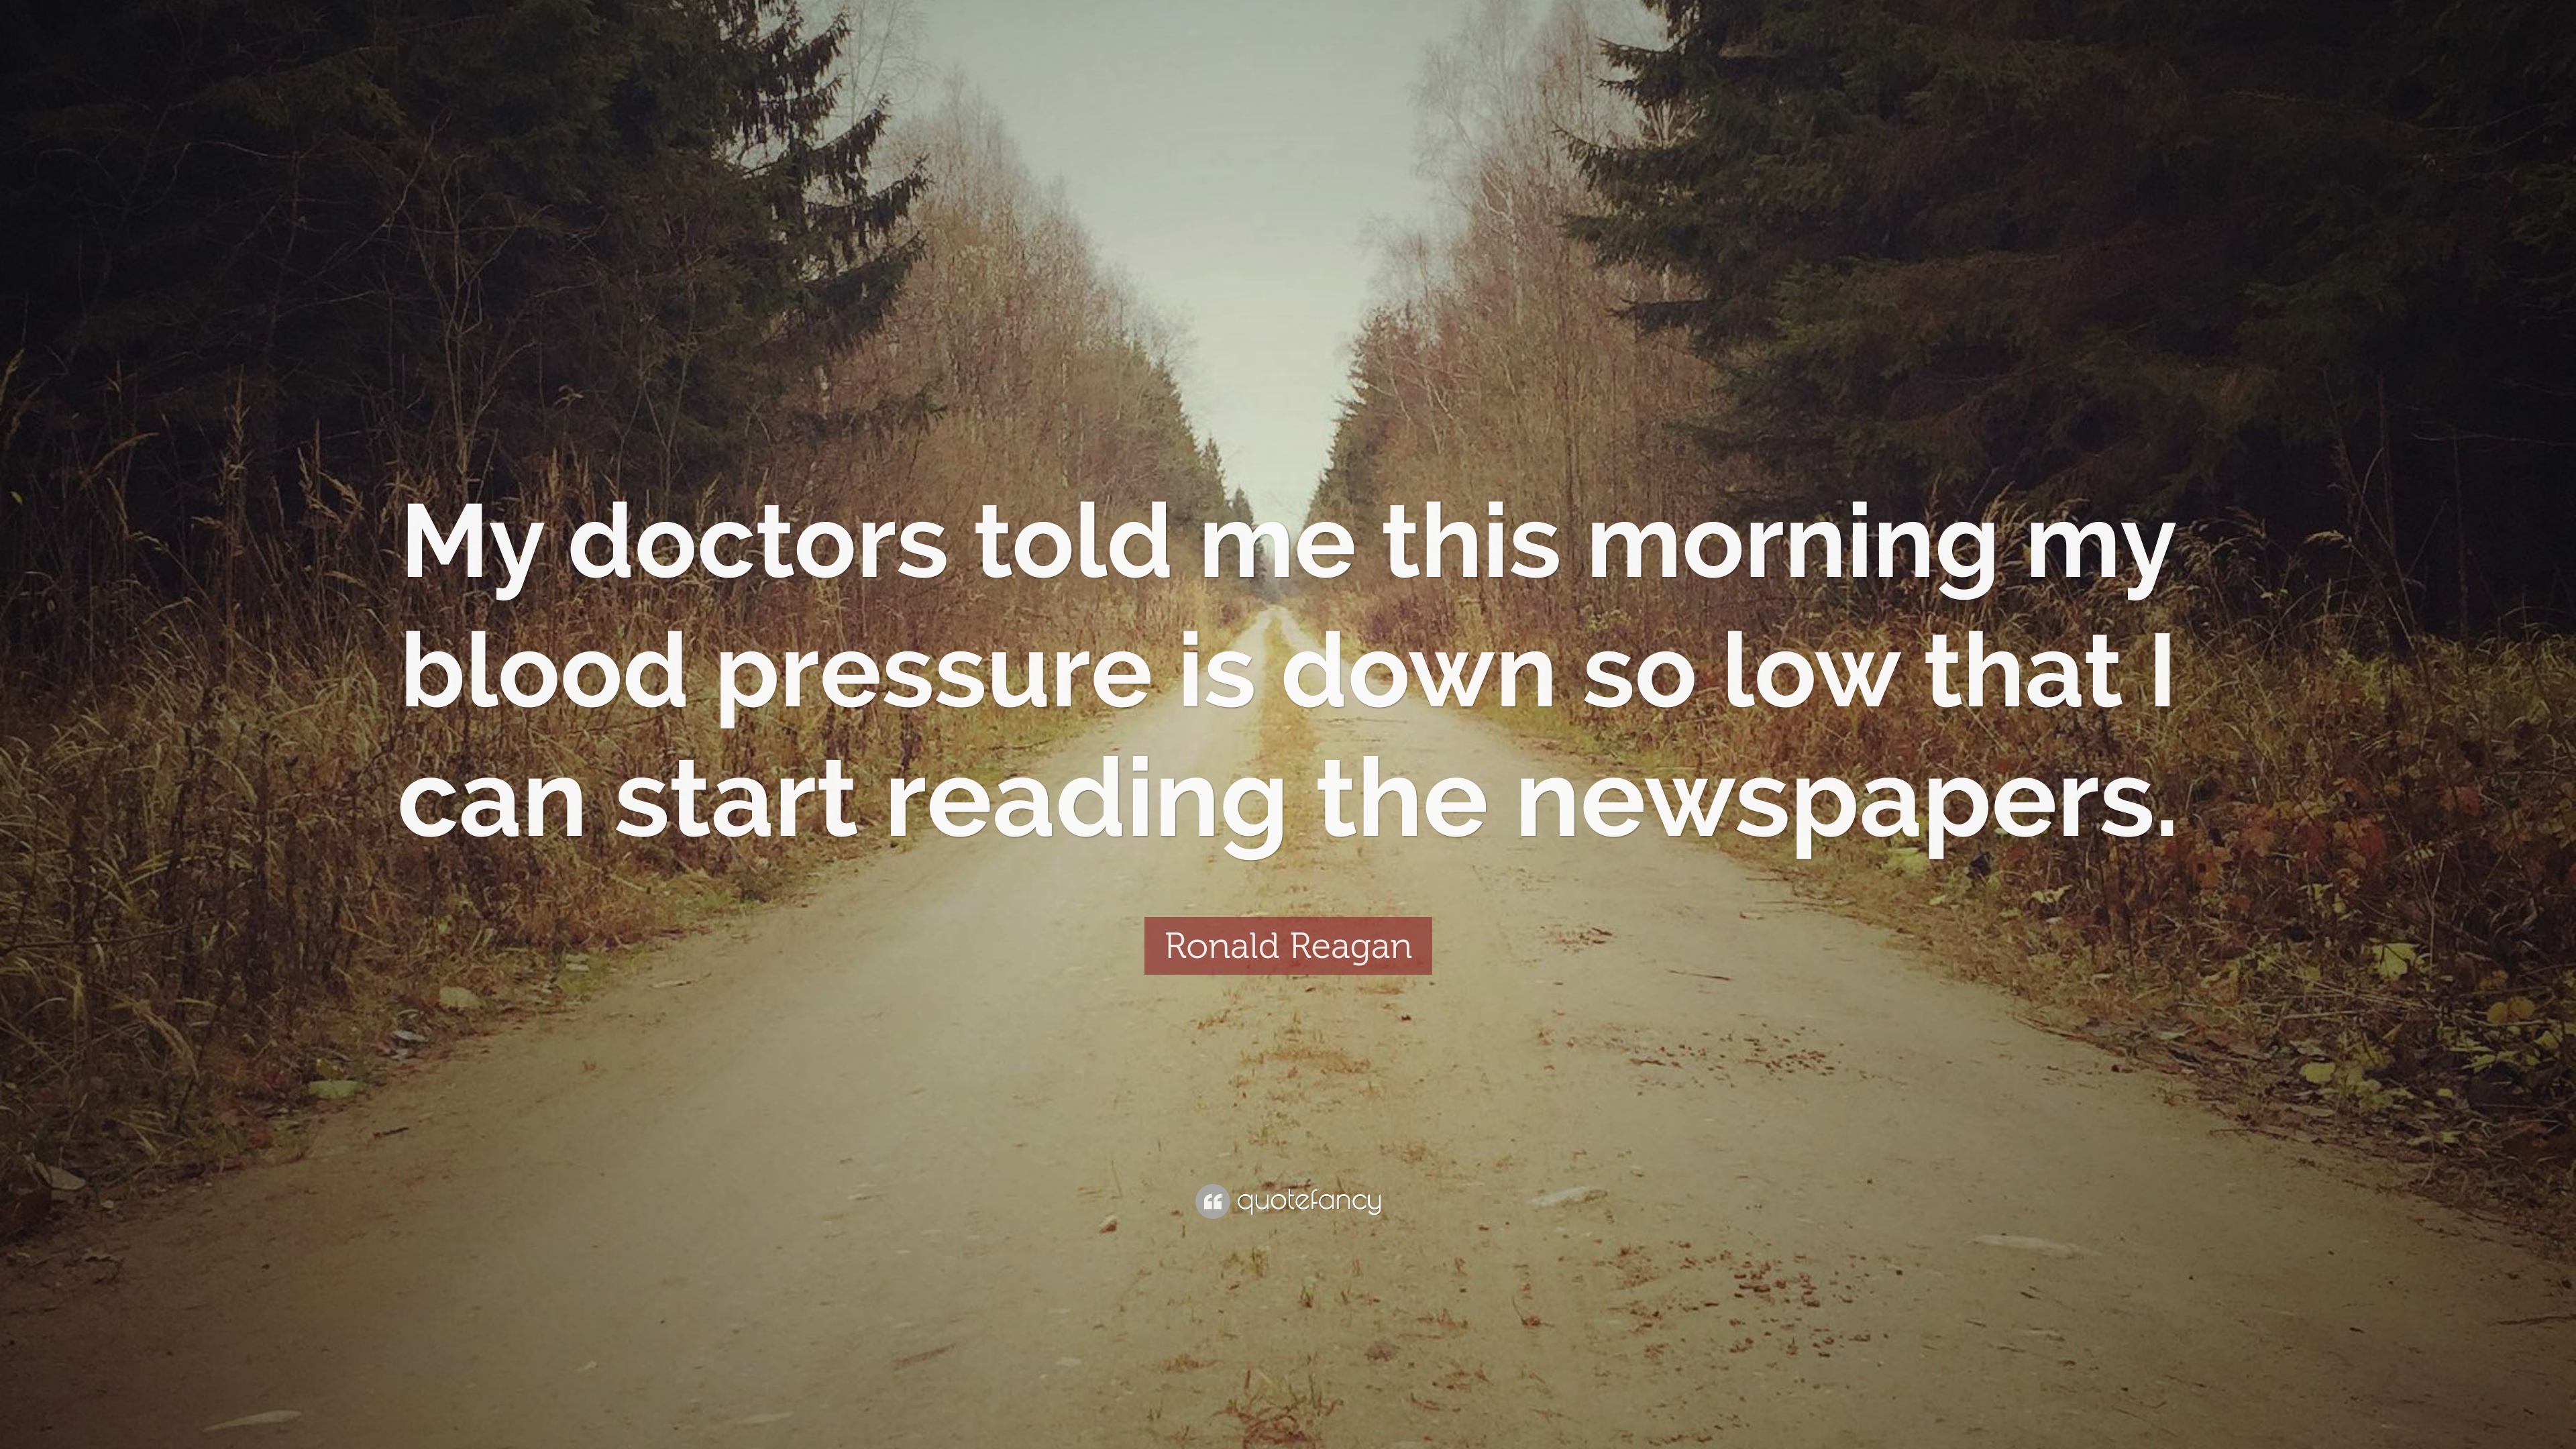 Ronald Reagan Quote: “My doctors told me this morning my blood pressure is down so low